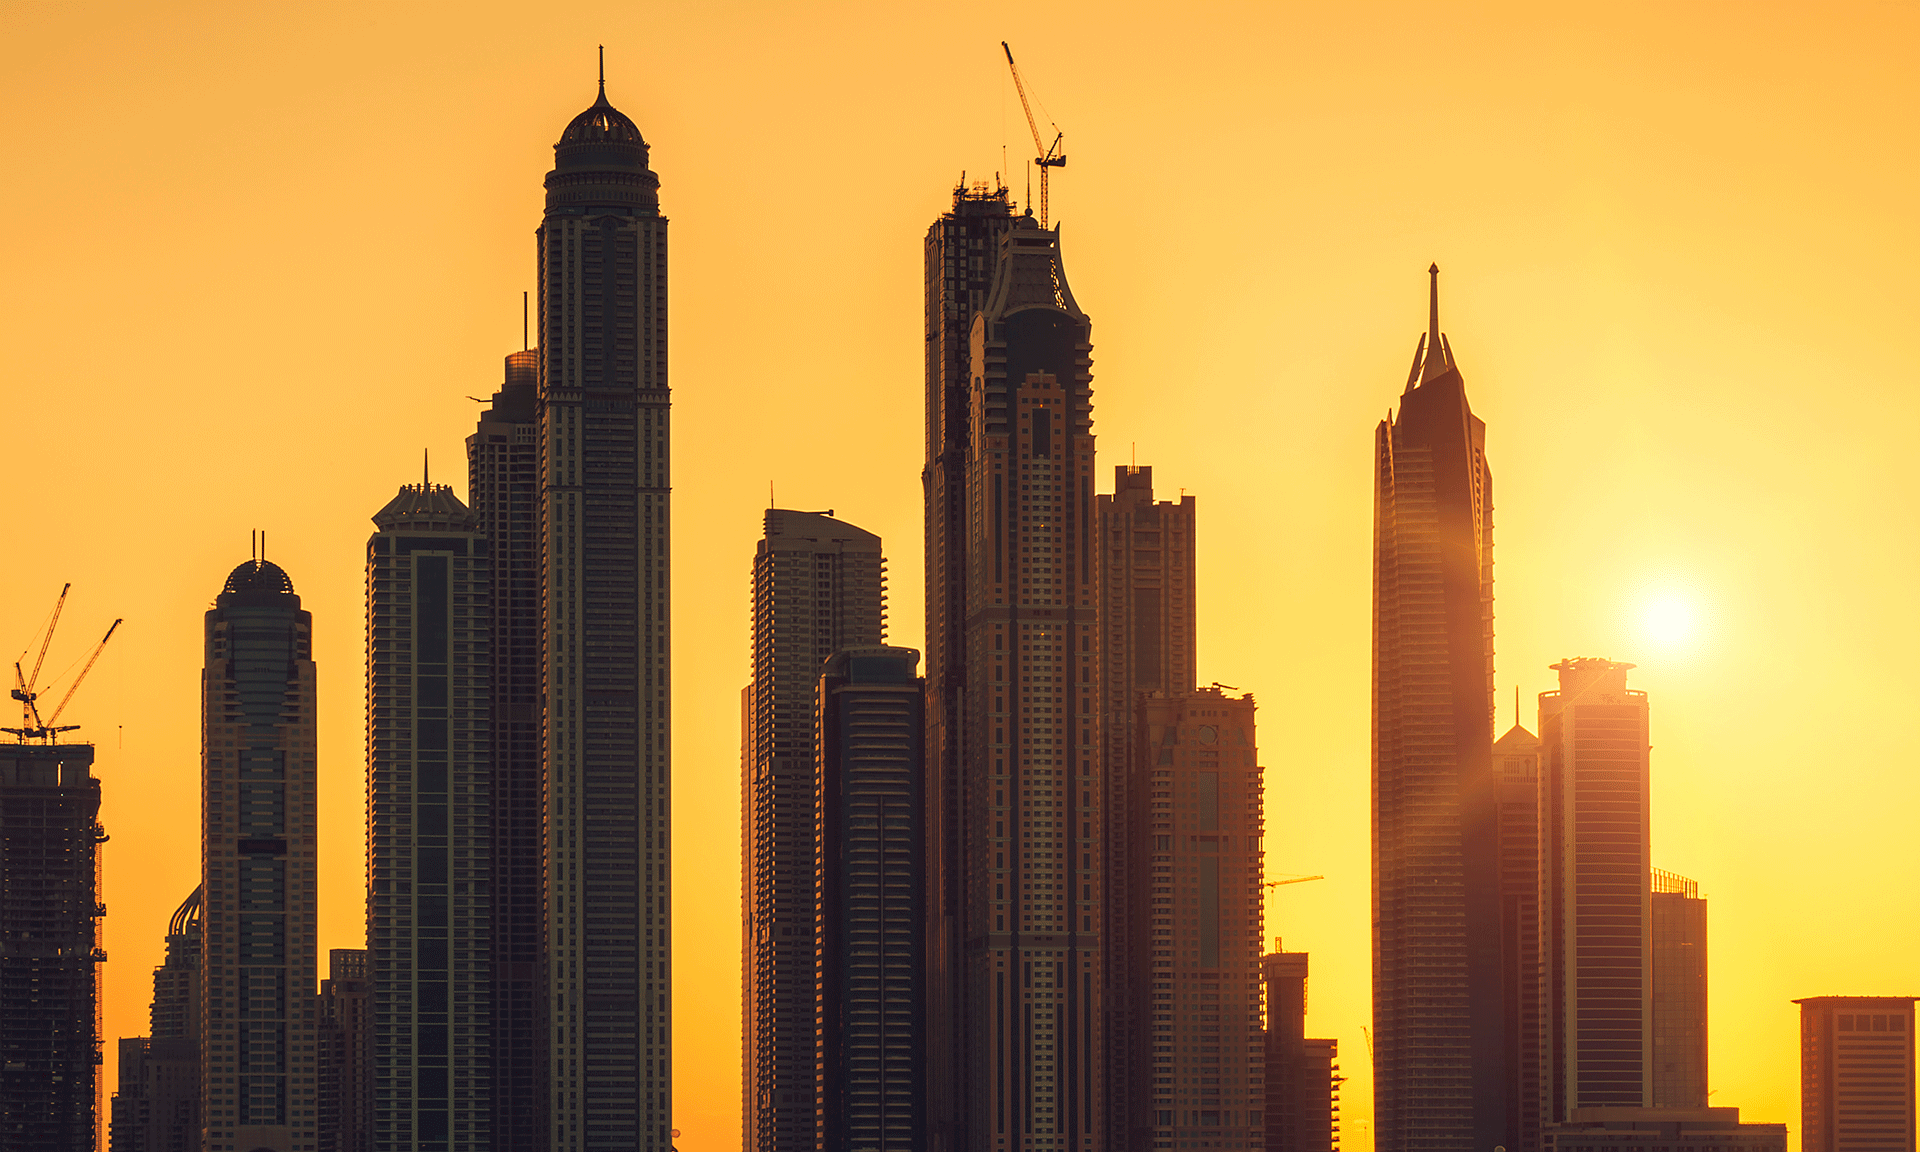 Industry leaders foresee a double-digit growth in the UAE construction sector in 2020